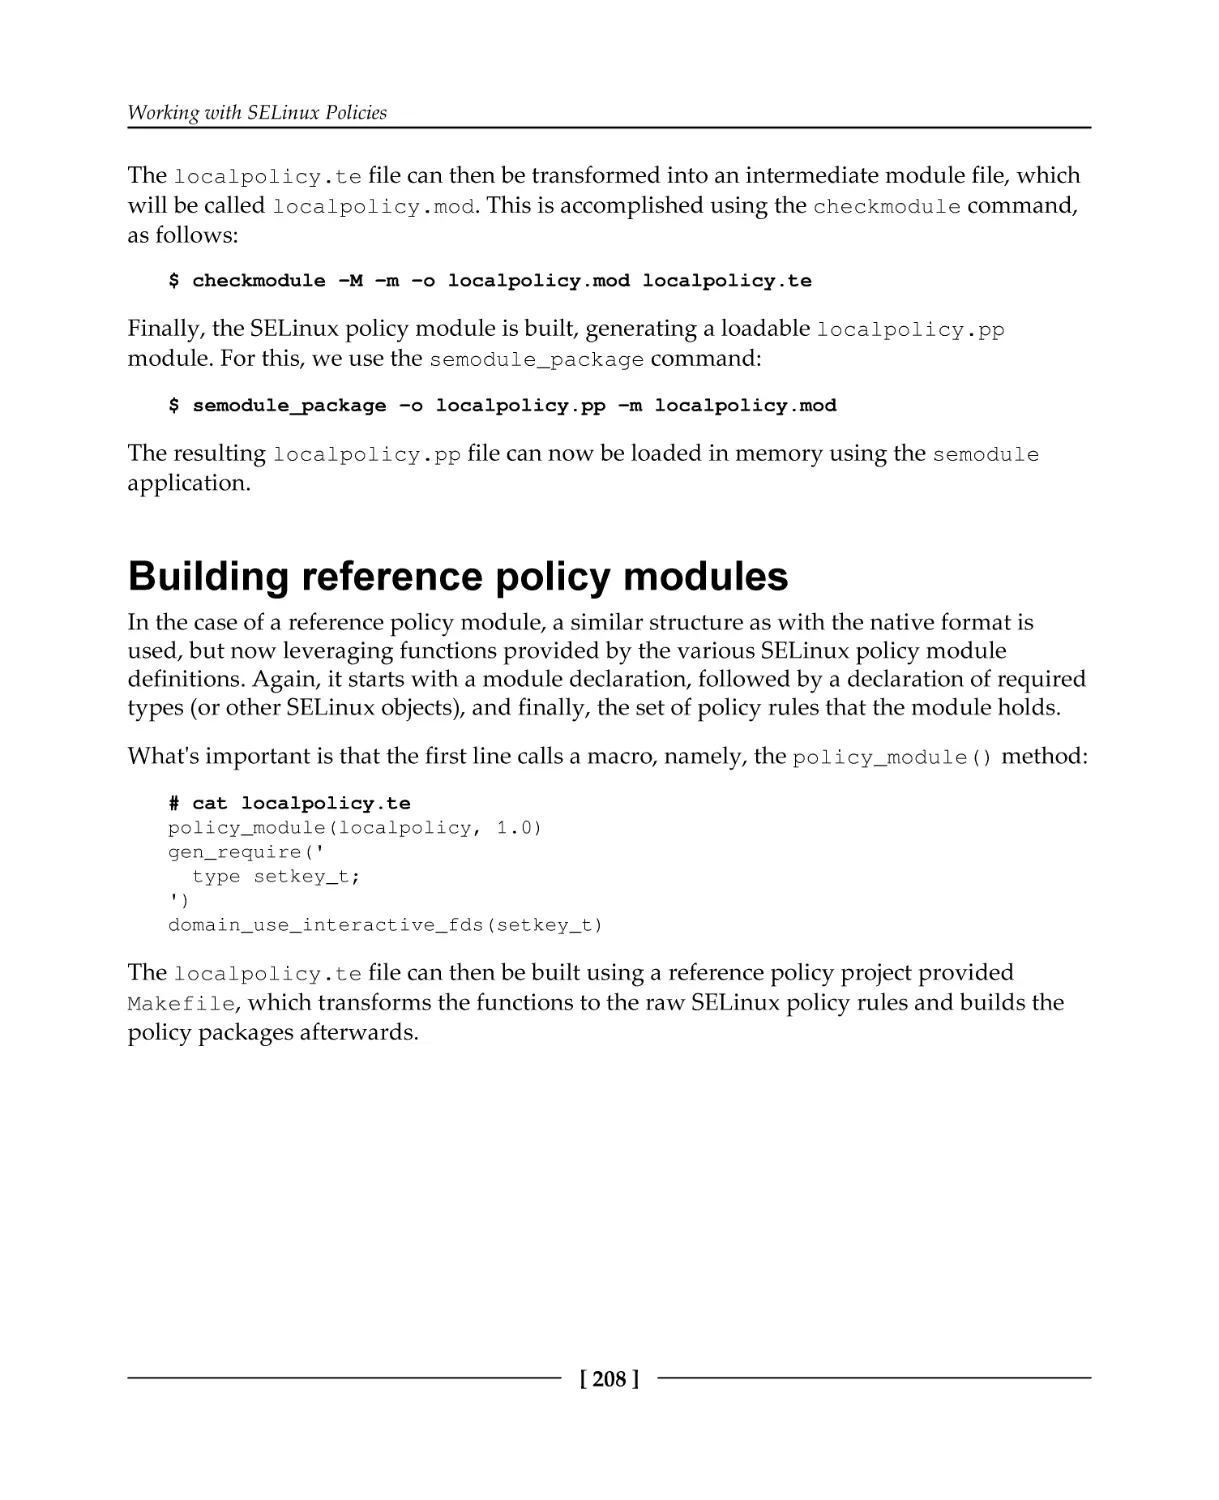 Building reference policy modules